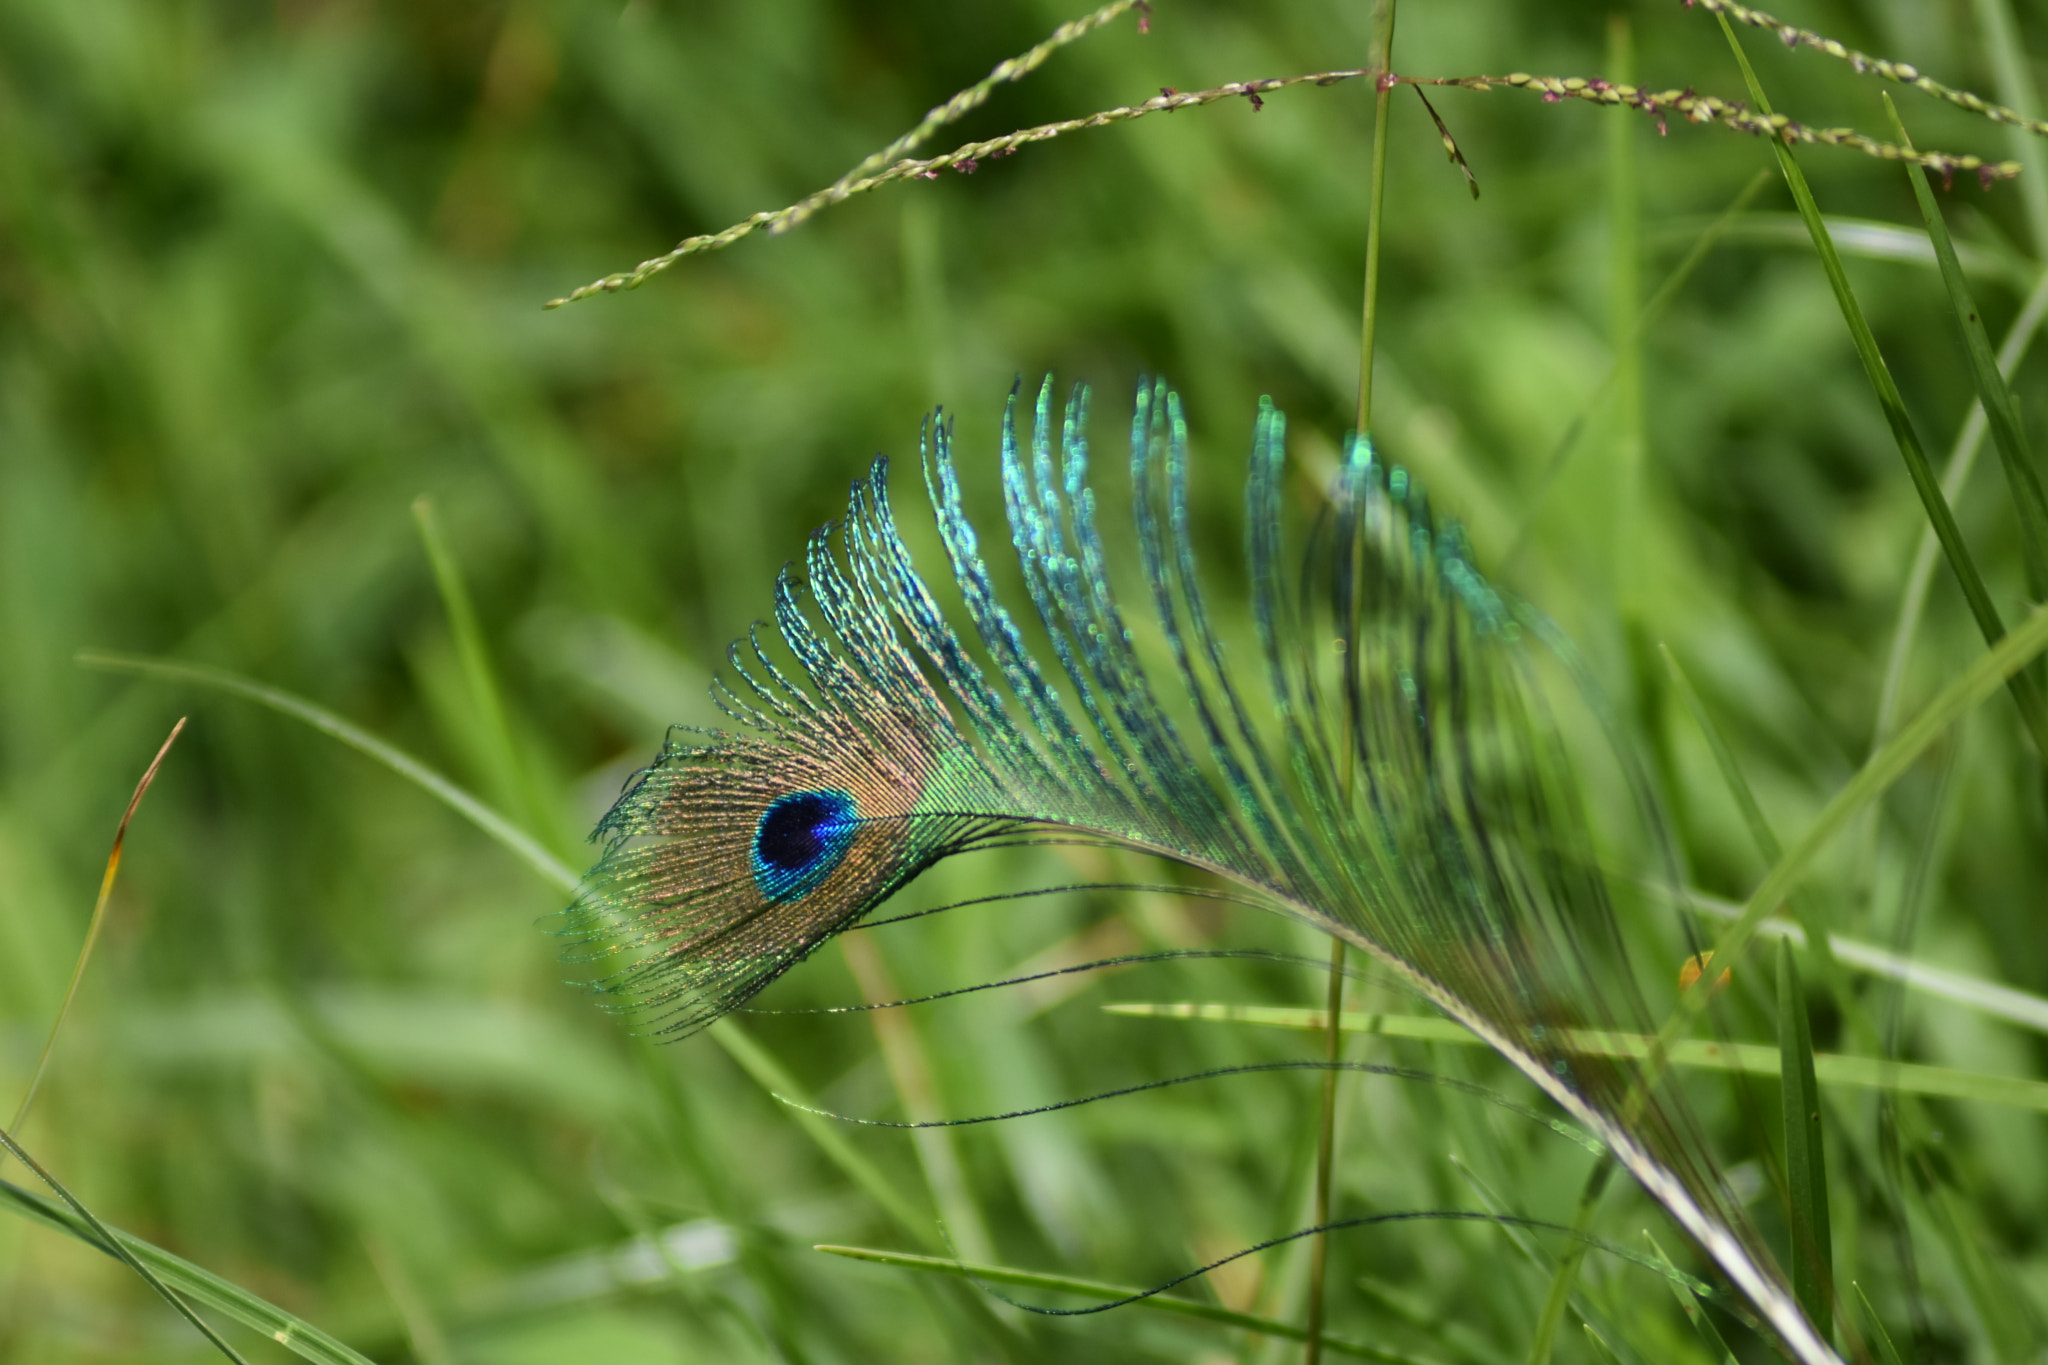 AF Zoom-Nikkor 80-200mm f/4.5-5.6D sample photo. Peacock feather photography